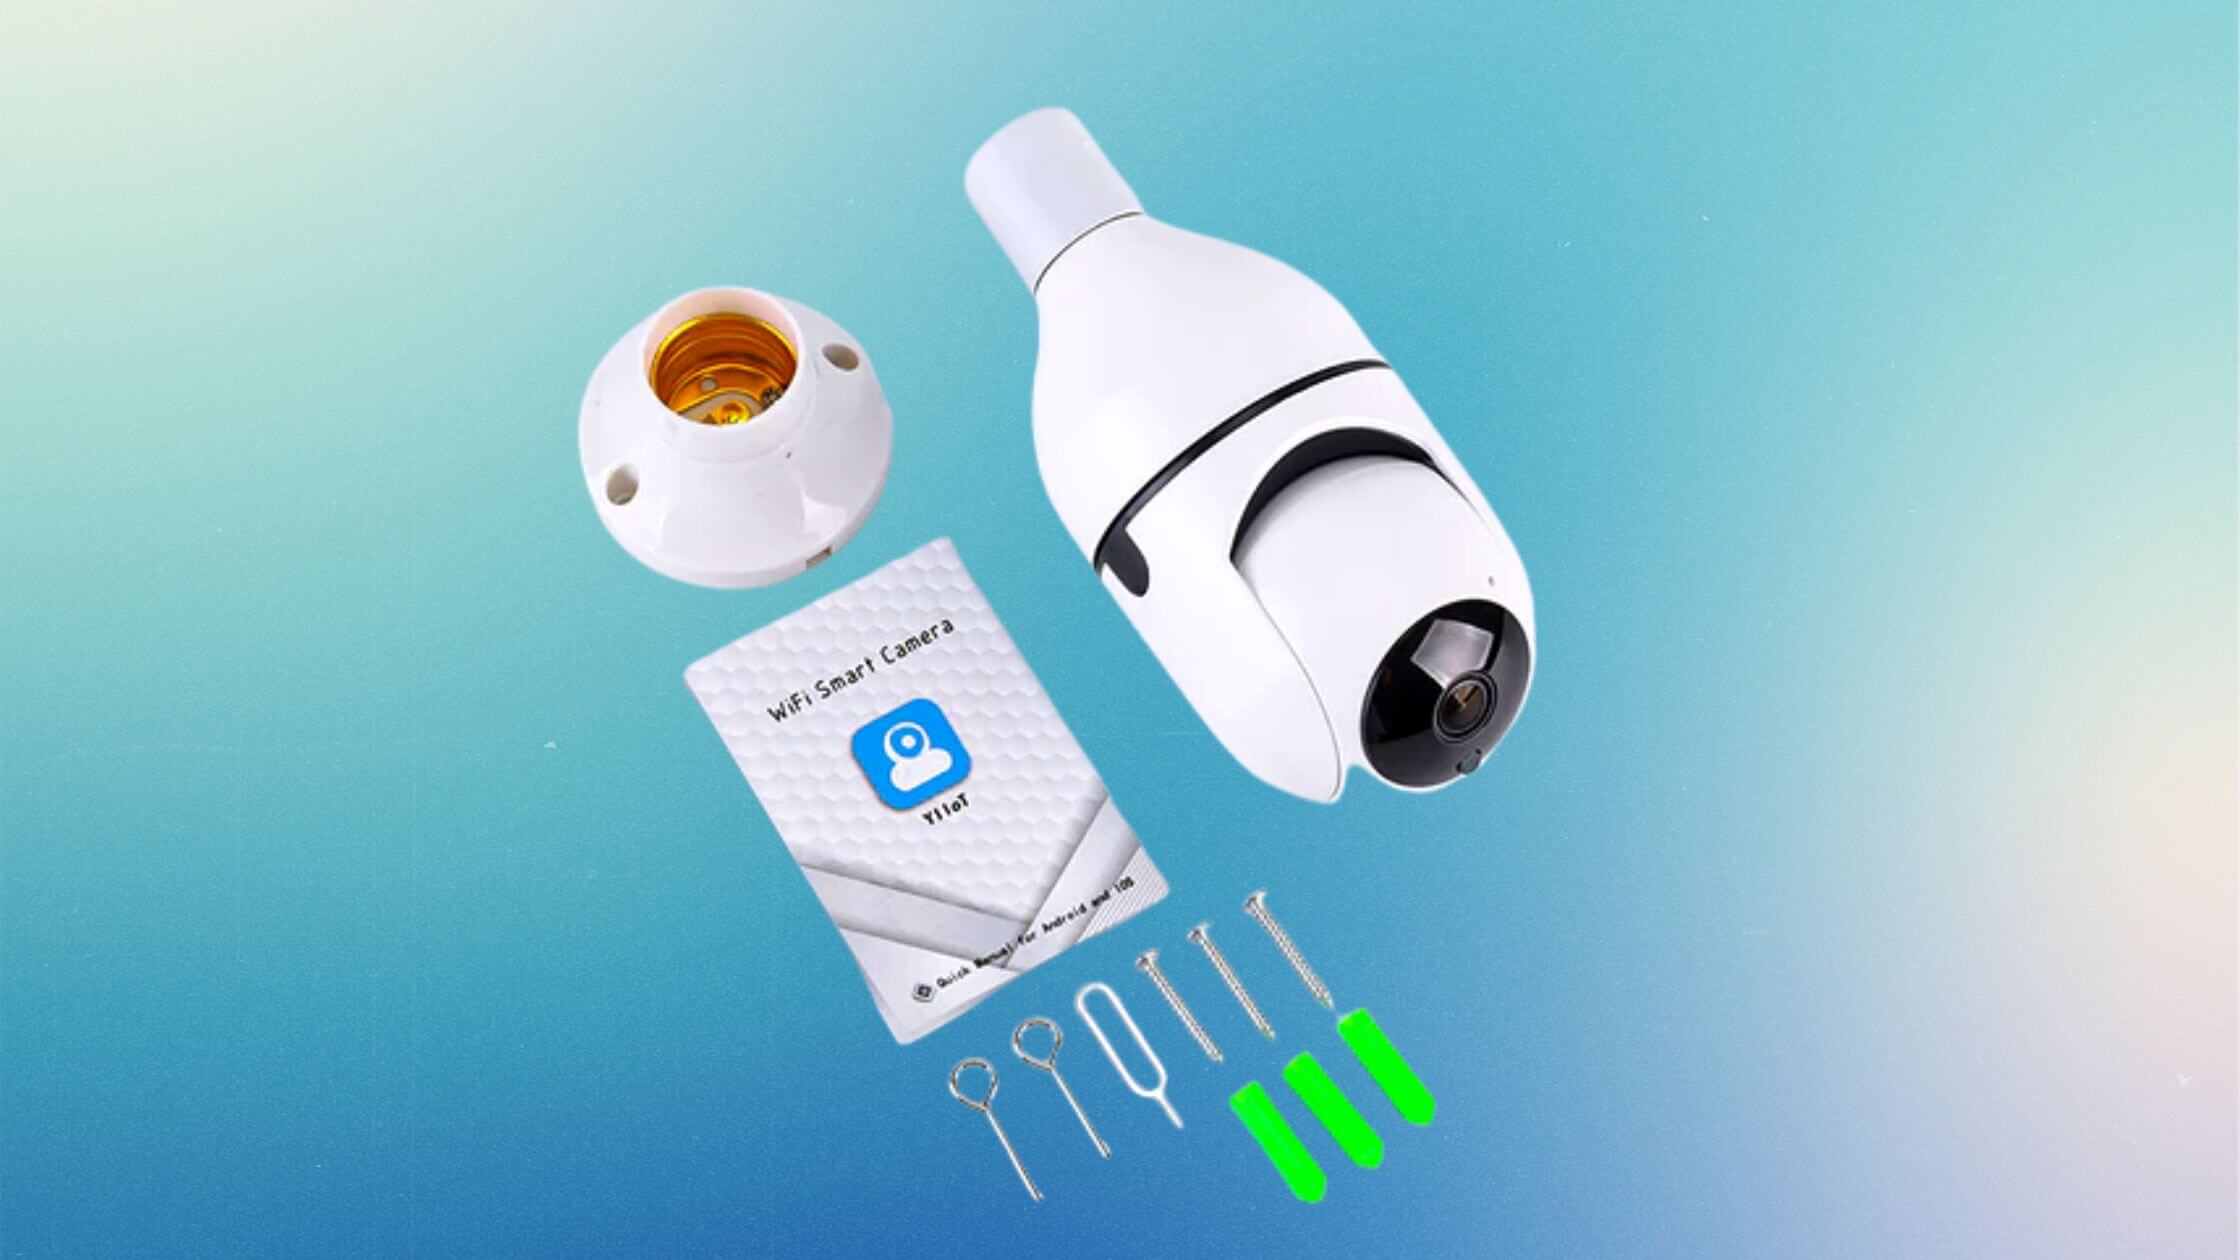 Nomad Security Camera Components